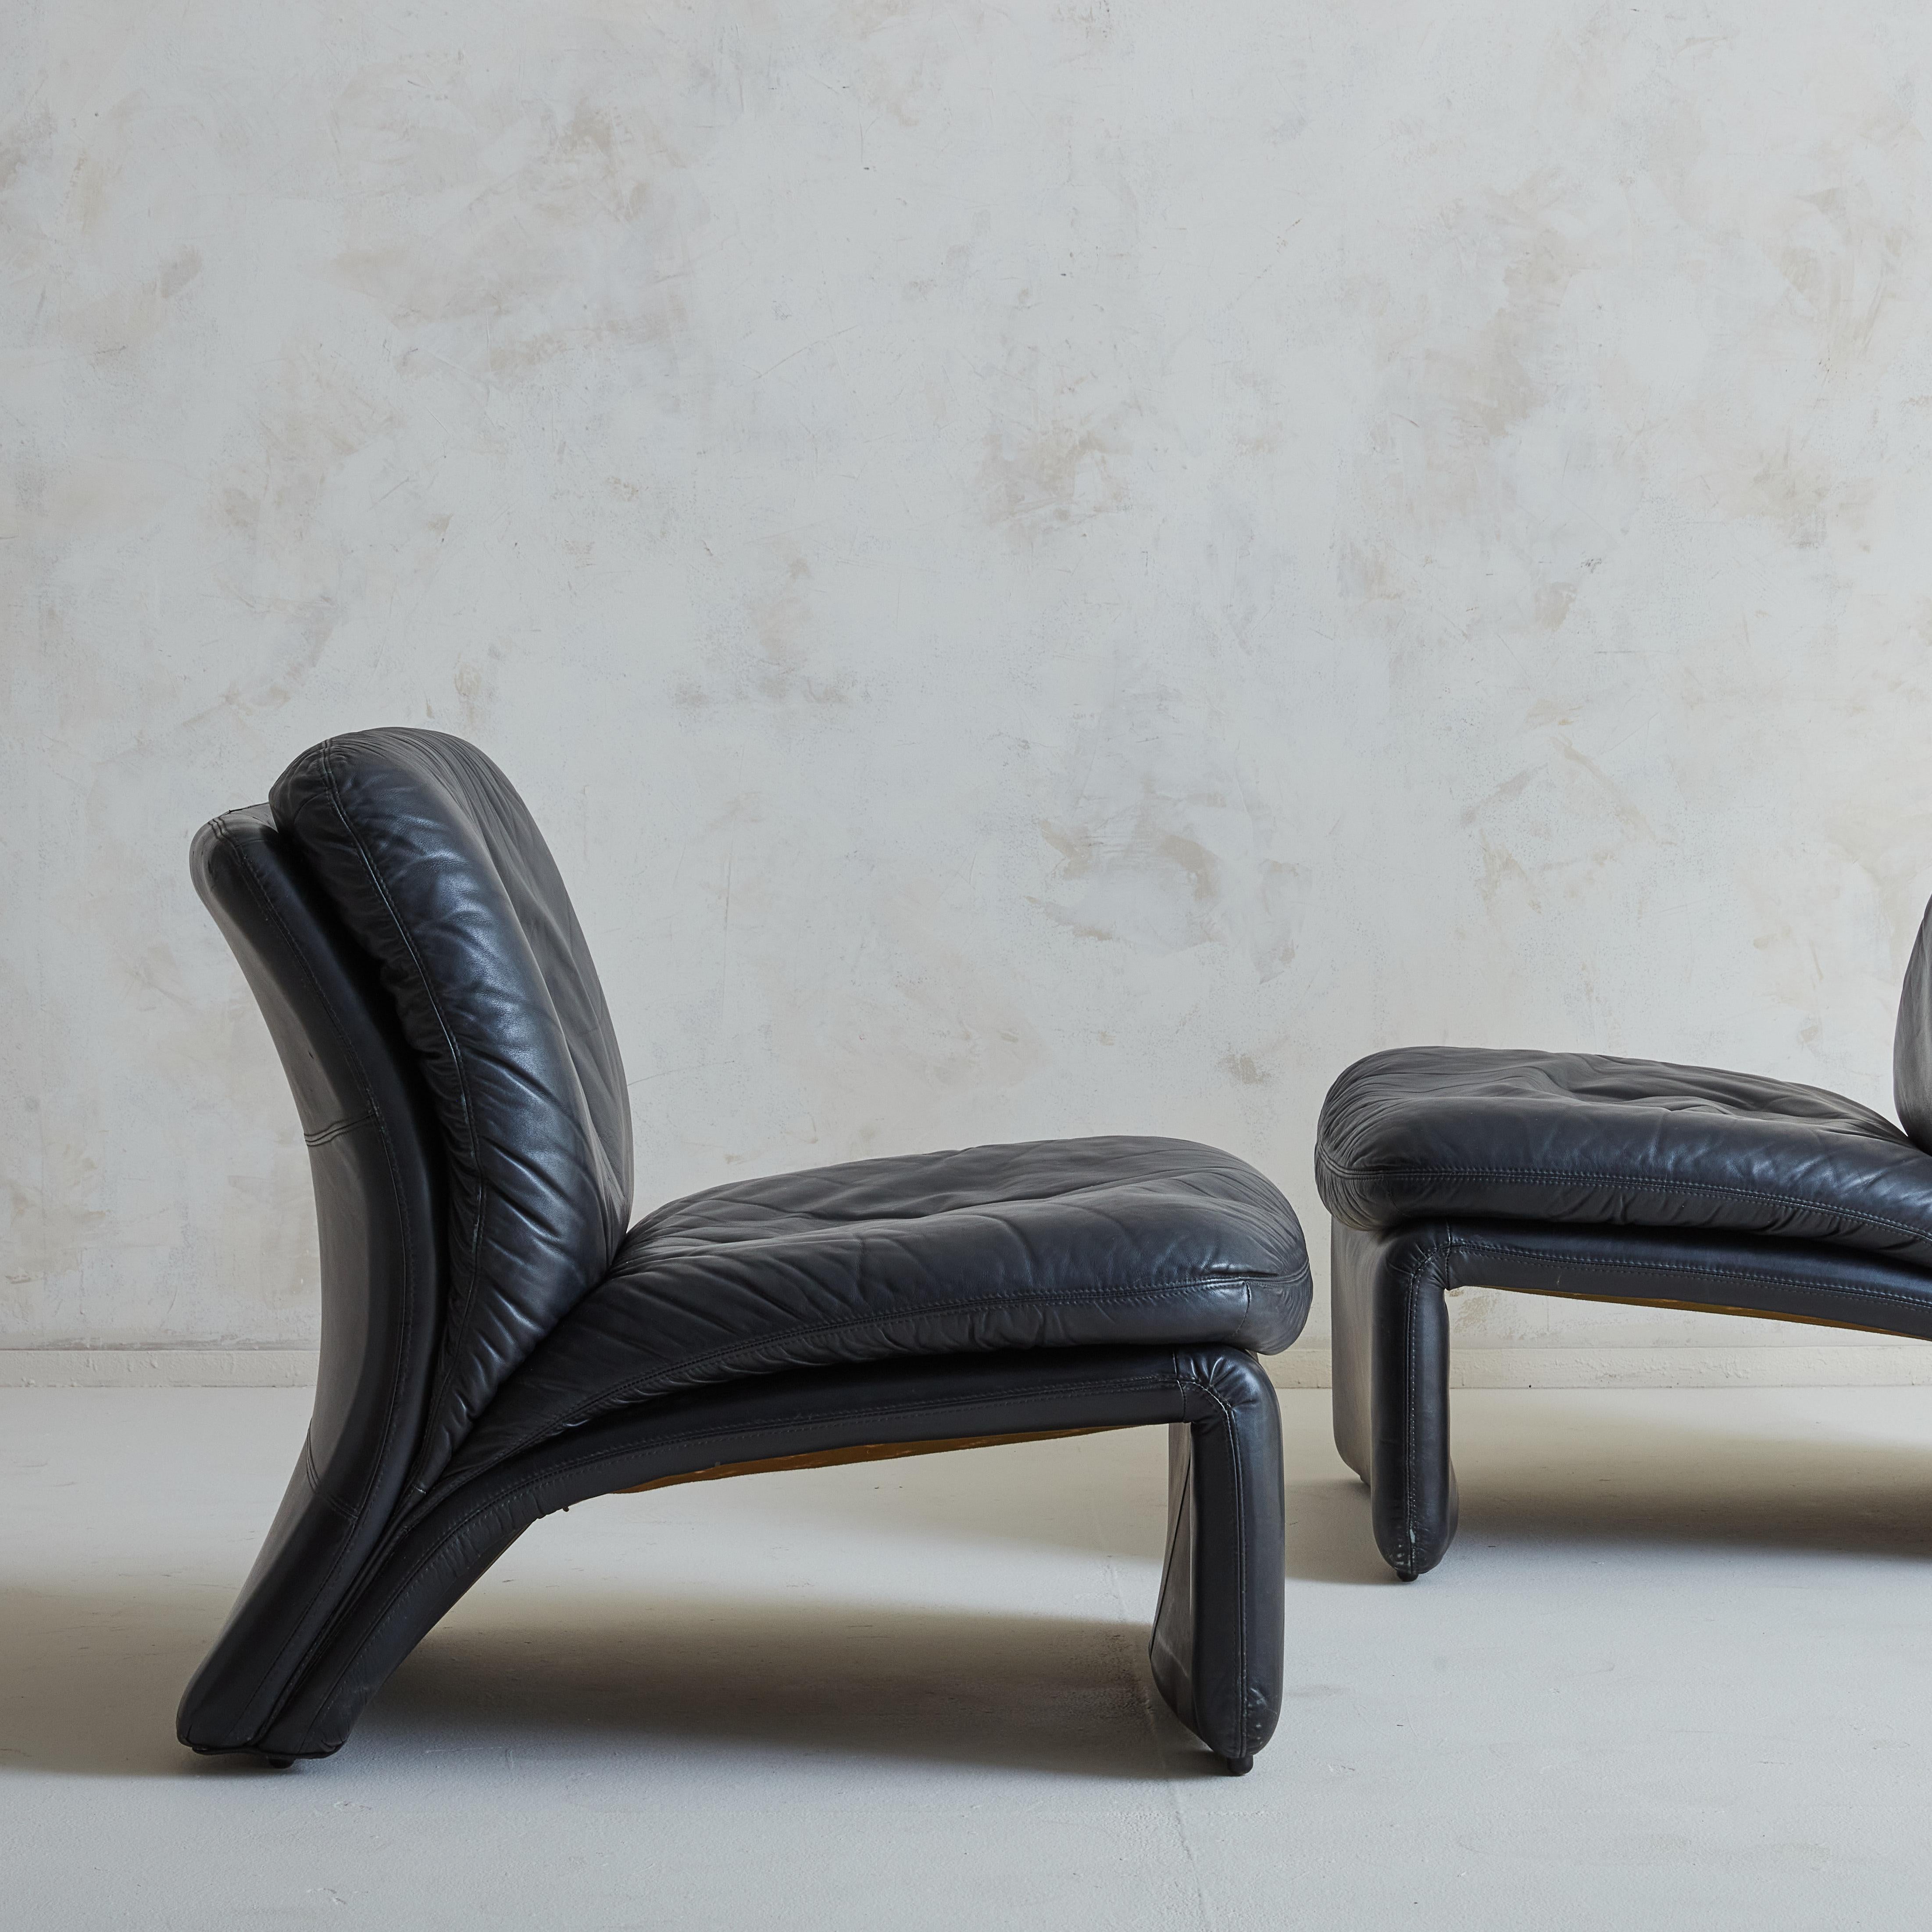 Italian Curved Lounge Chair in Original Black Leather by B&T Salotti, Italy 1990s